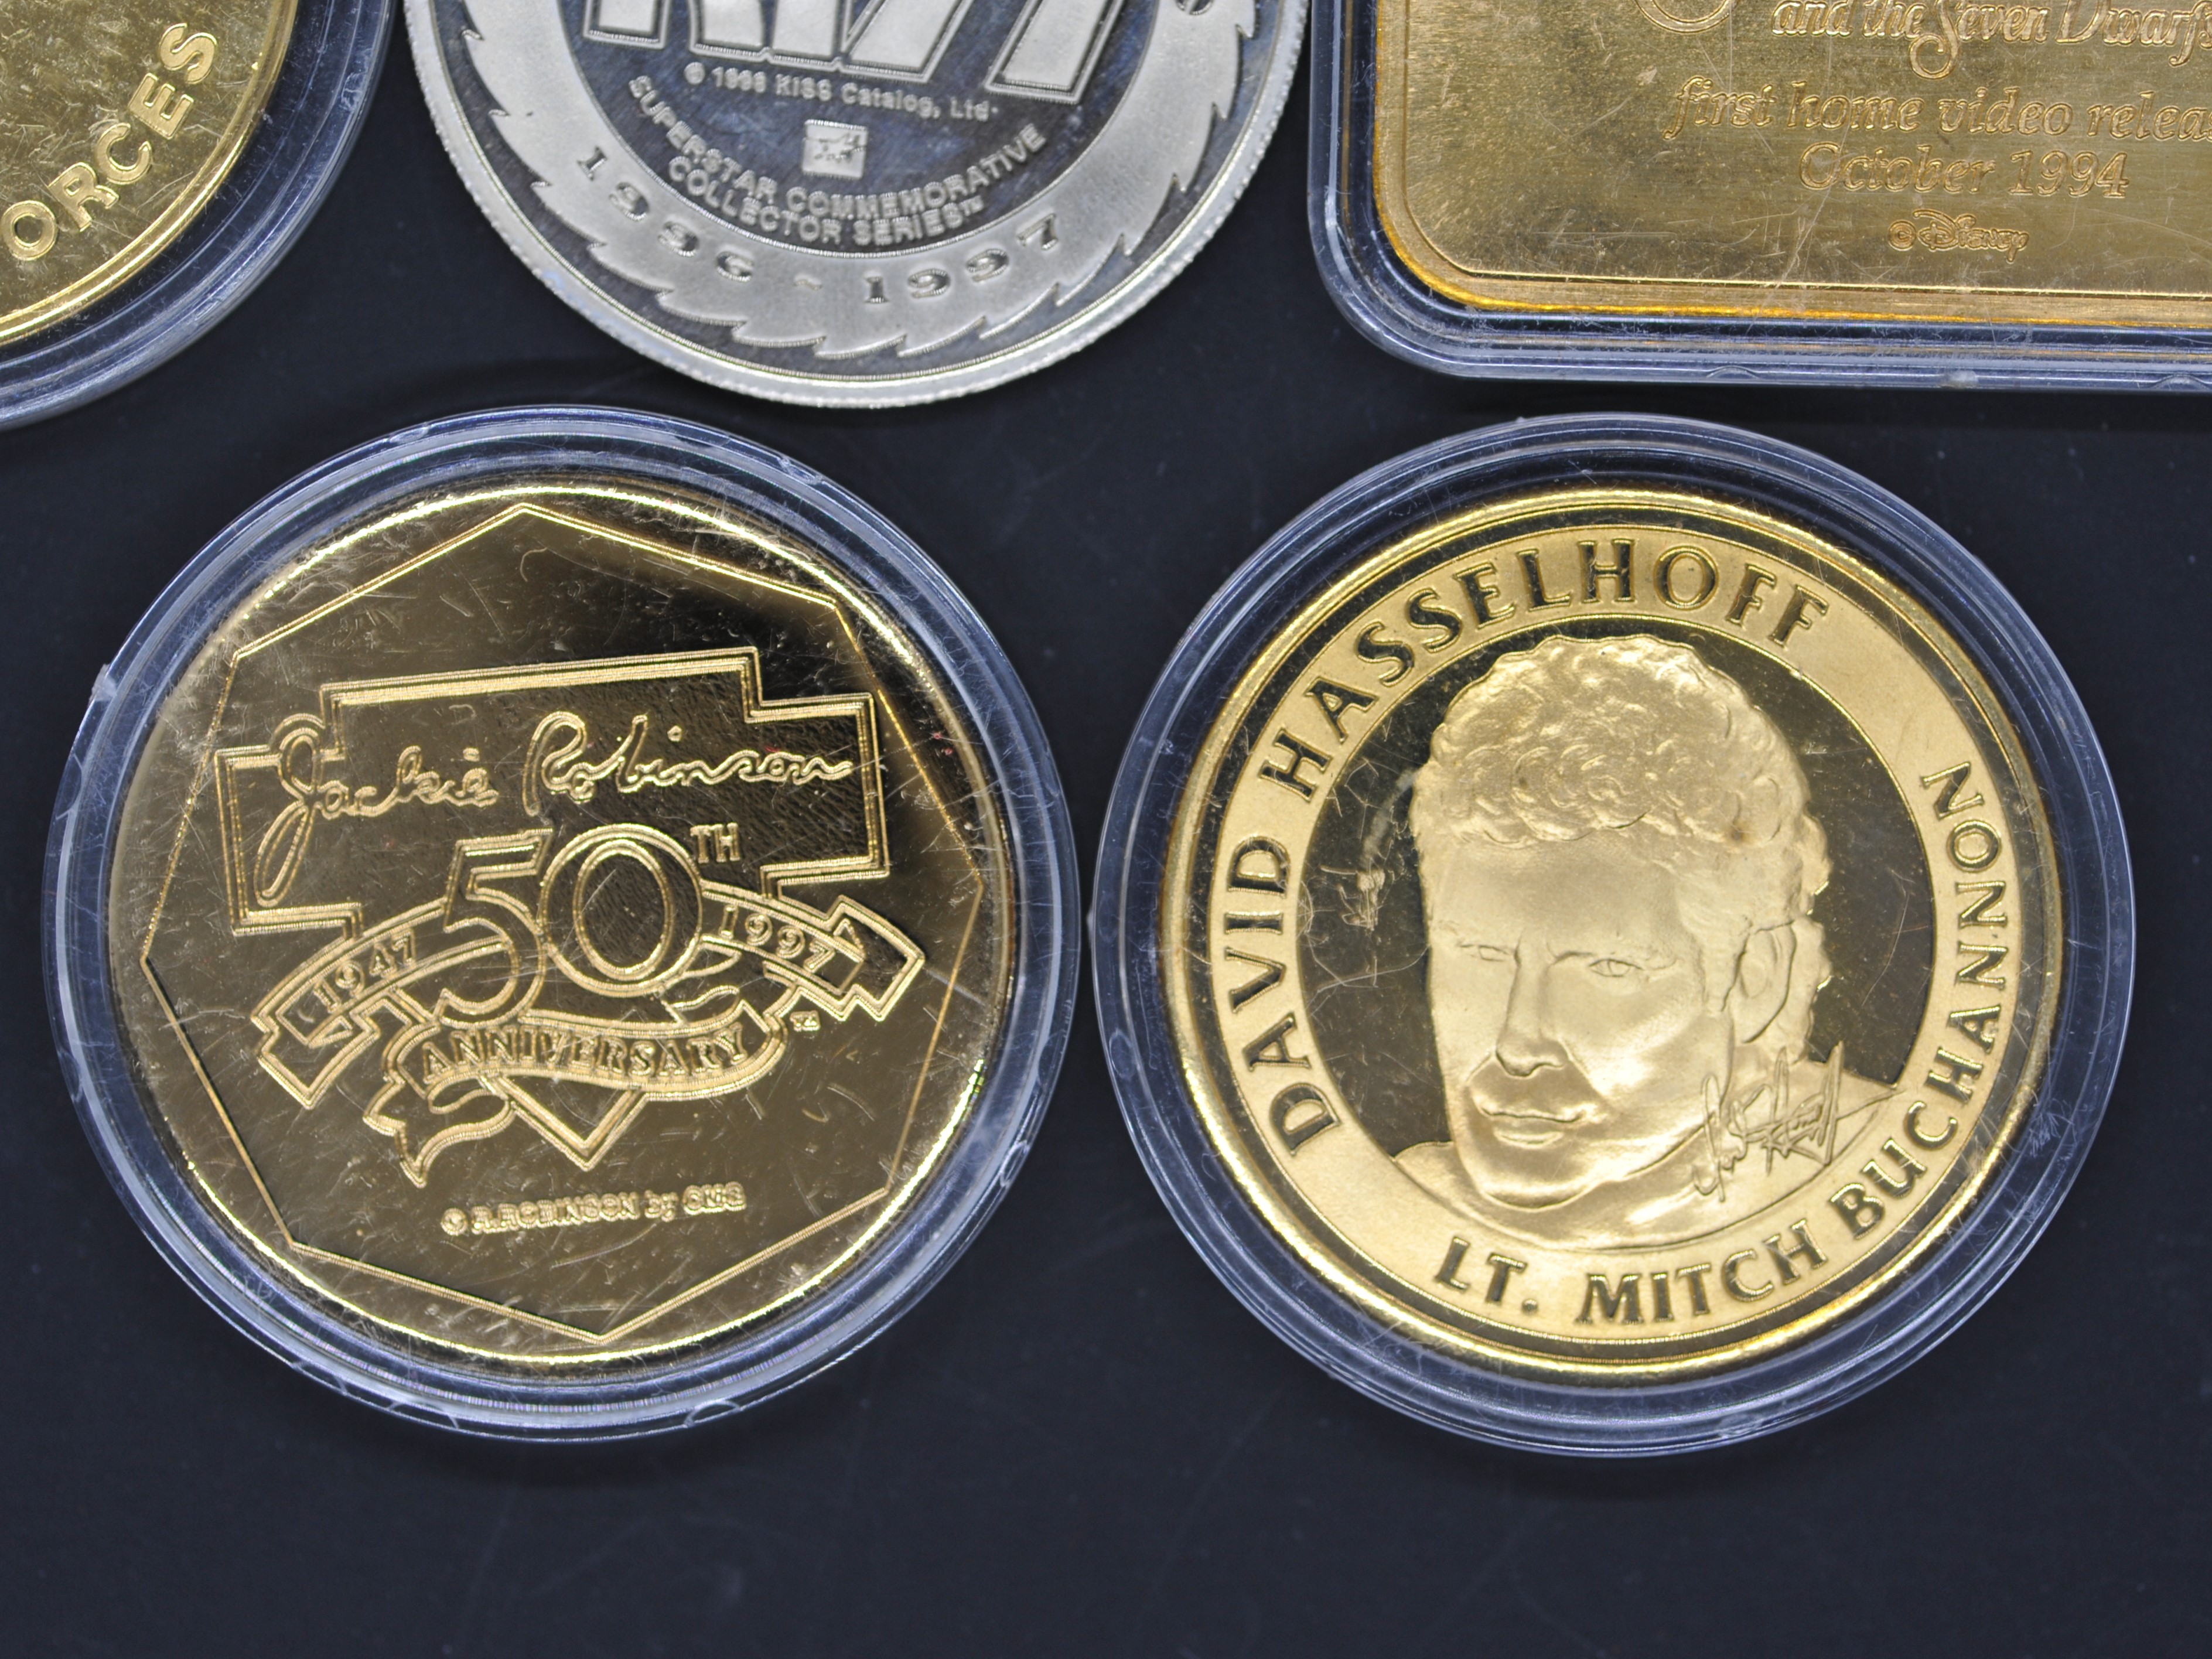 Collectable- Eight collectible coins / medallions struck by Liberty mint in the USA. - Image 3 of 5